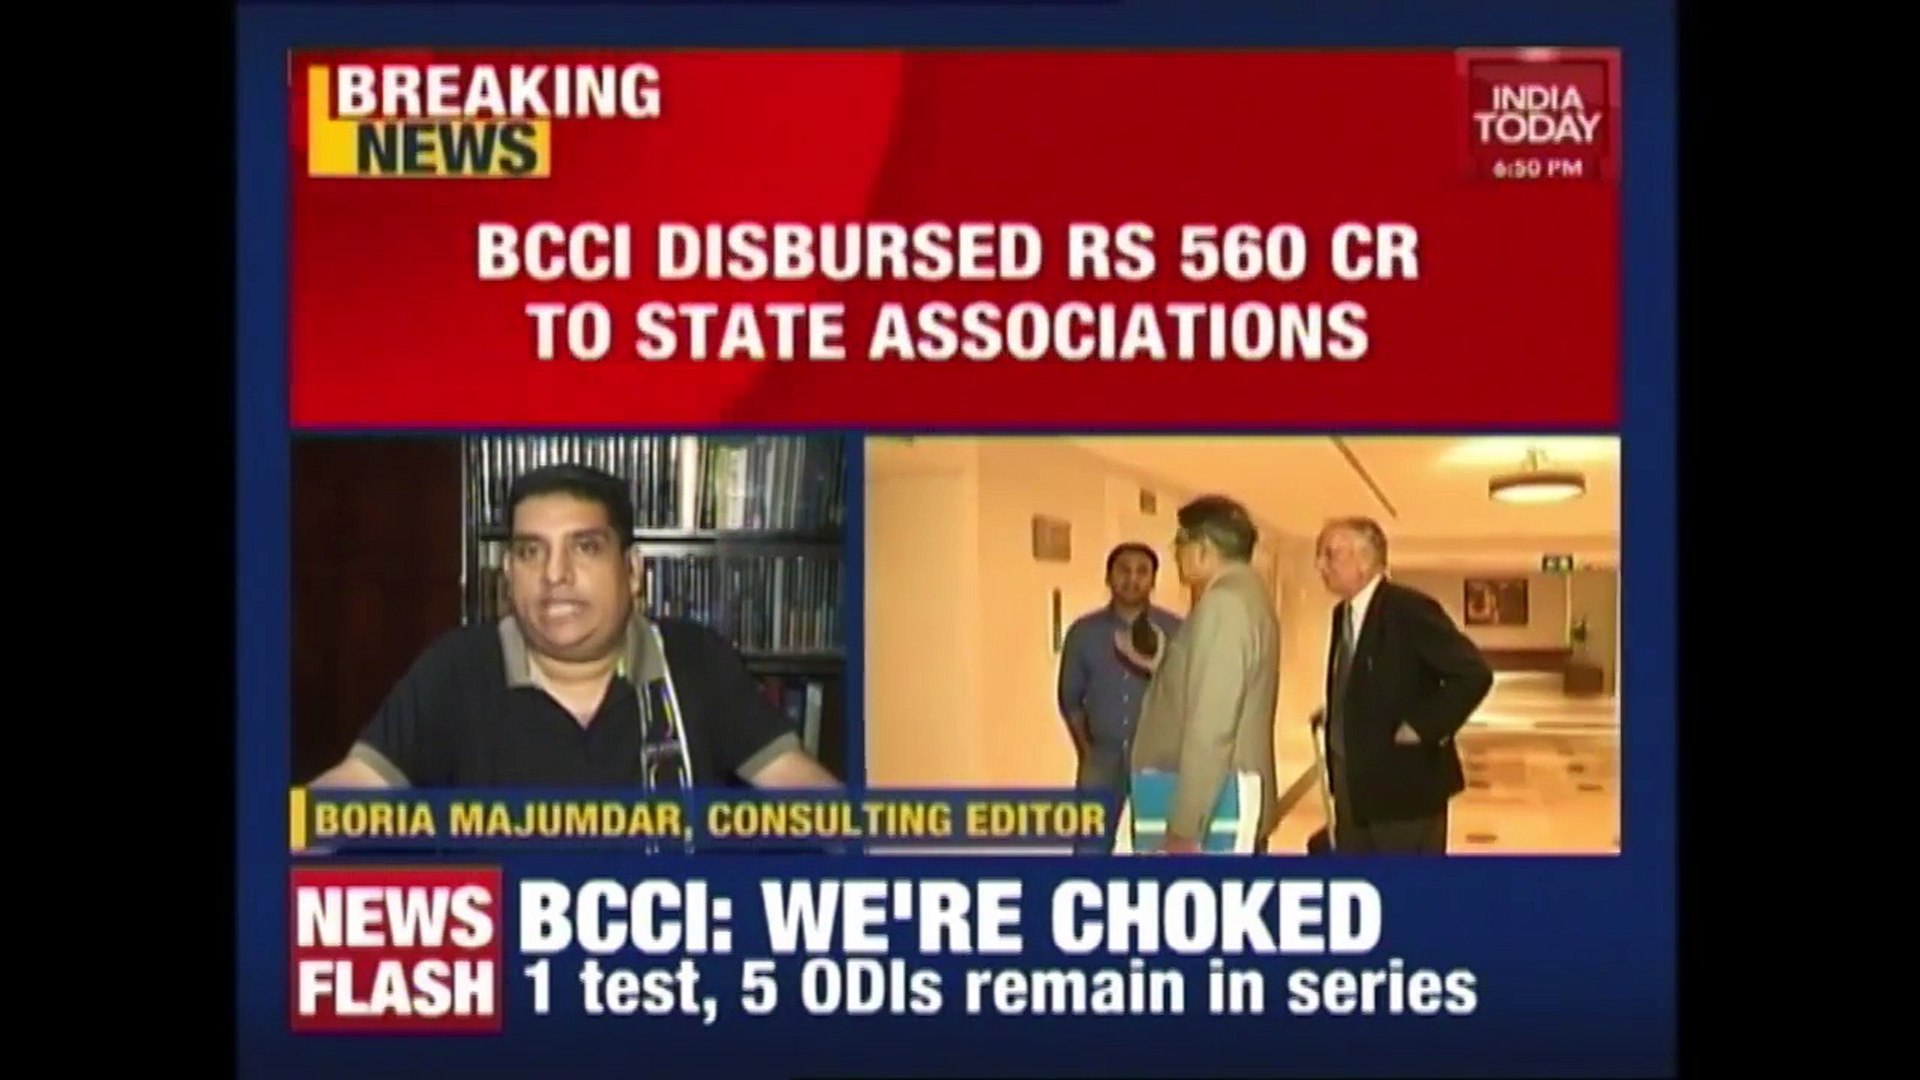 BCCI, Lodha Panel Lock Horns Over Funds